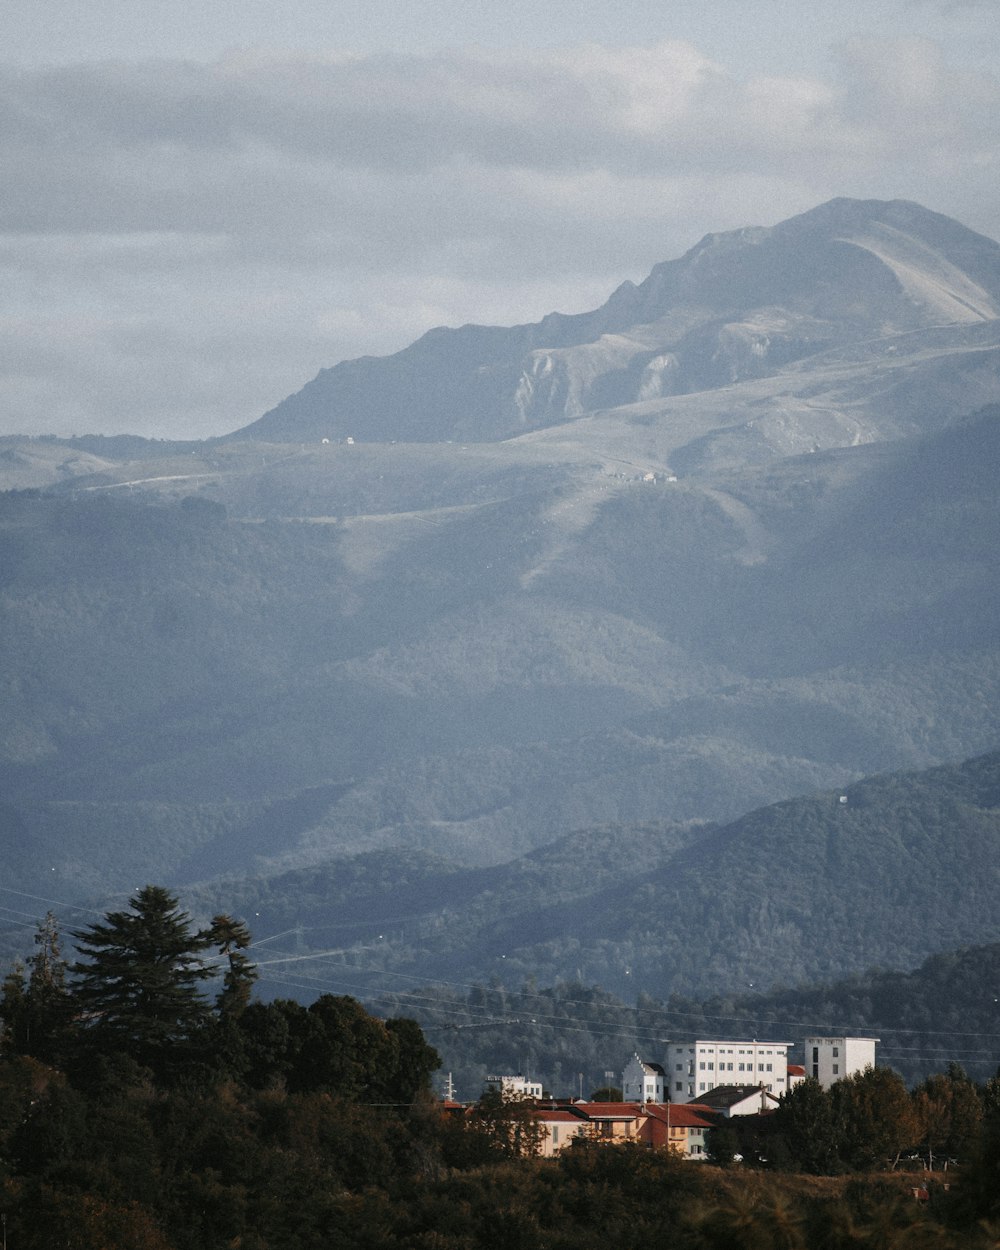 white and brown concrete buildings near green trees and mountains during daytime